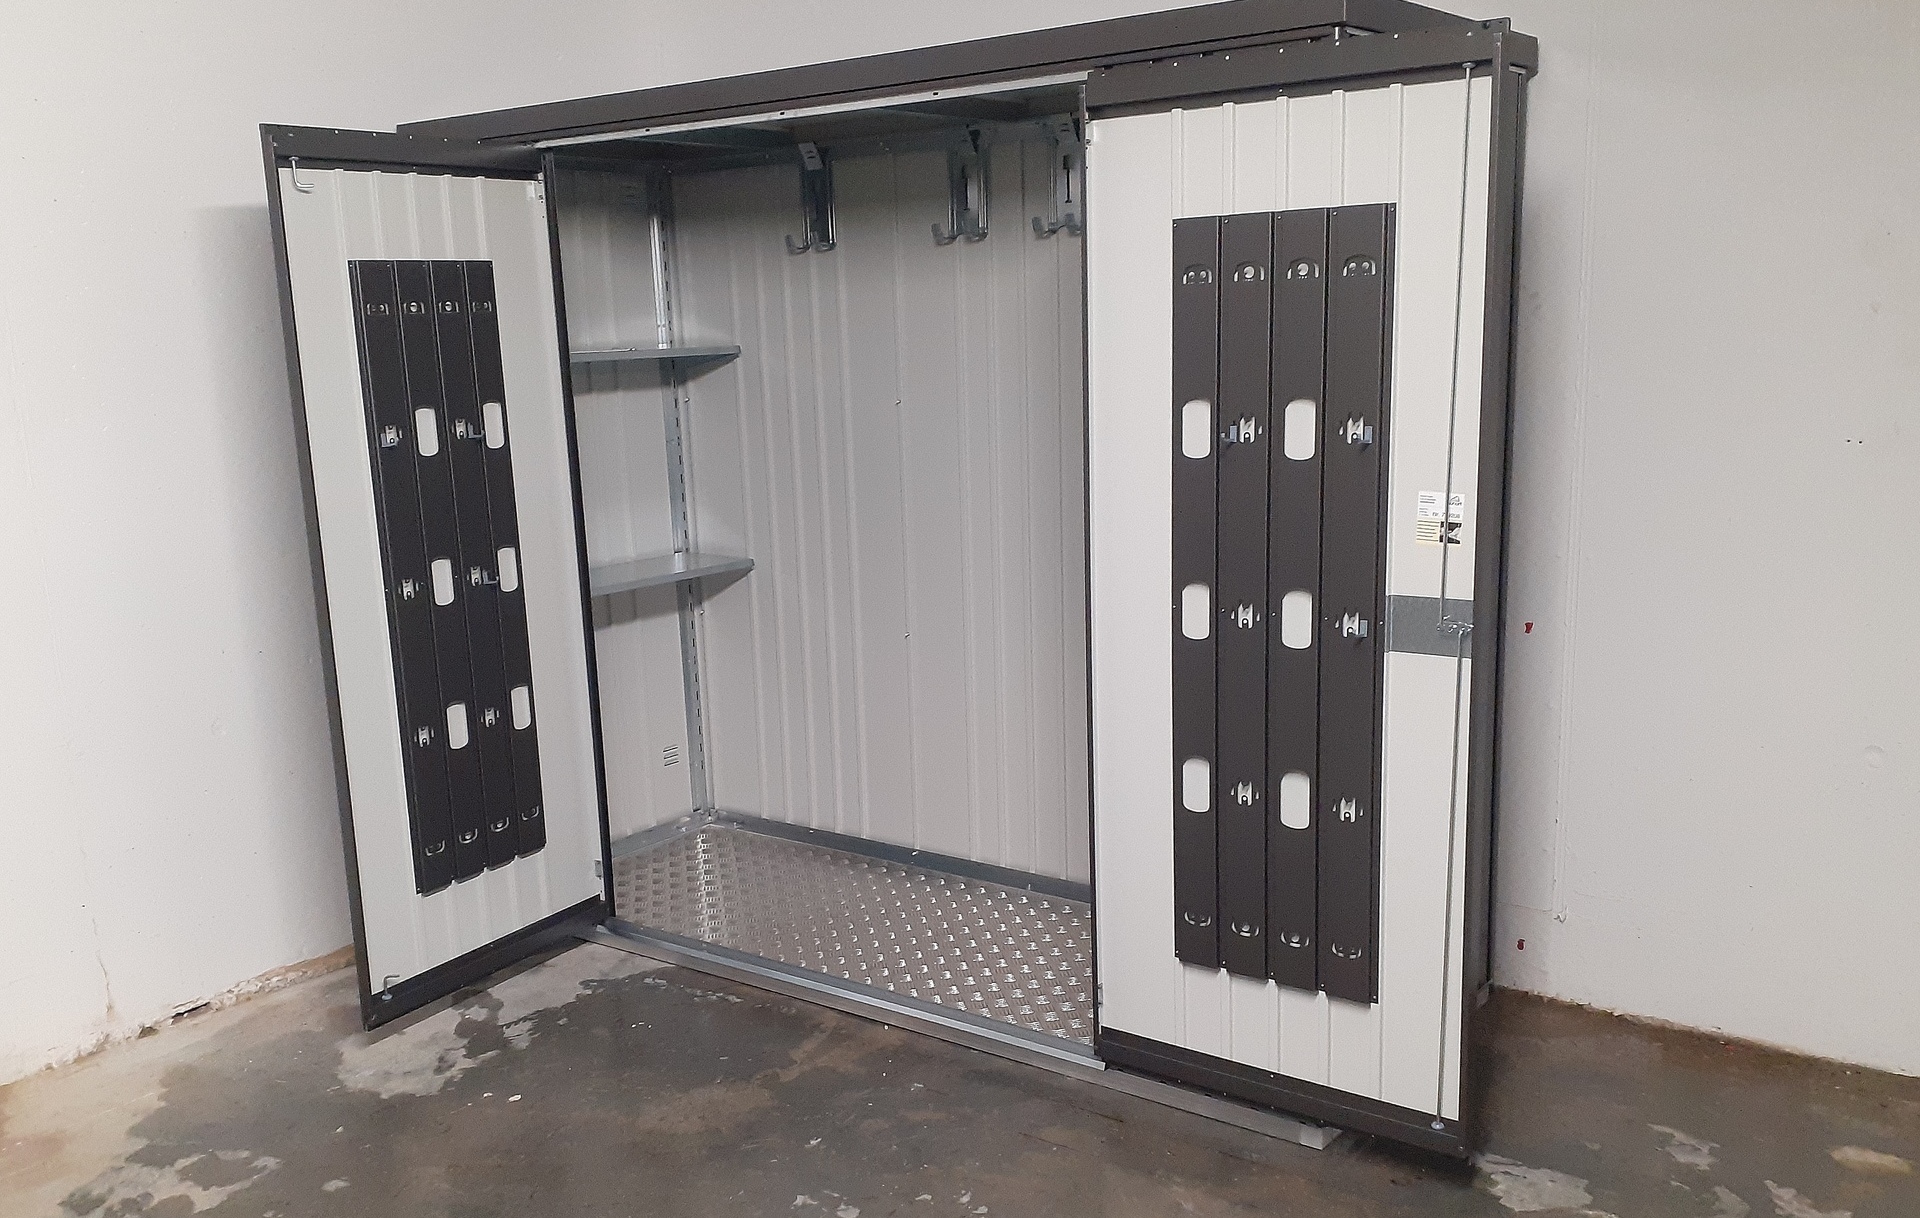 The superb quality and style of the Biohort Equipment Locker 230 with optional accessories including aluminium floor frame, aluminium floor panels | supplied + installed in Galway by Owen Chubb Landscapers. Tel 087-2306 128.